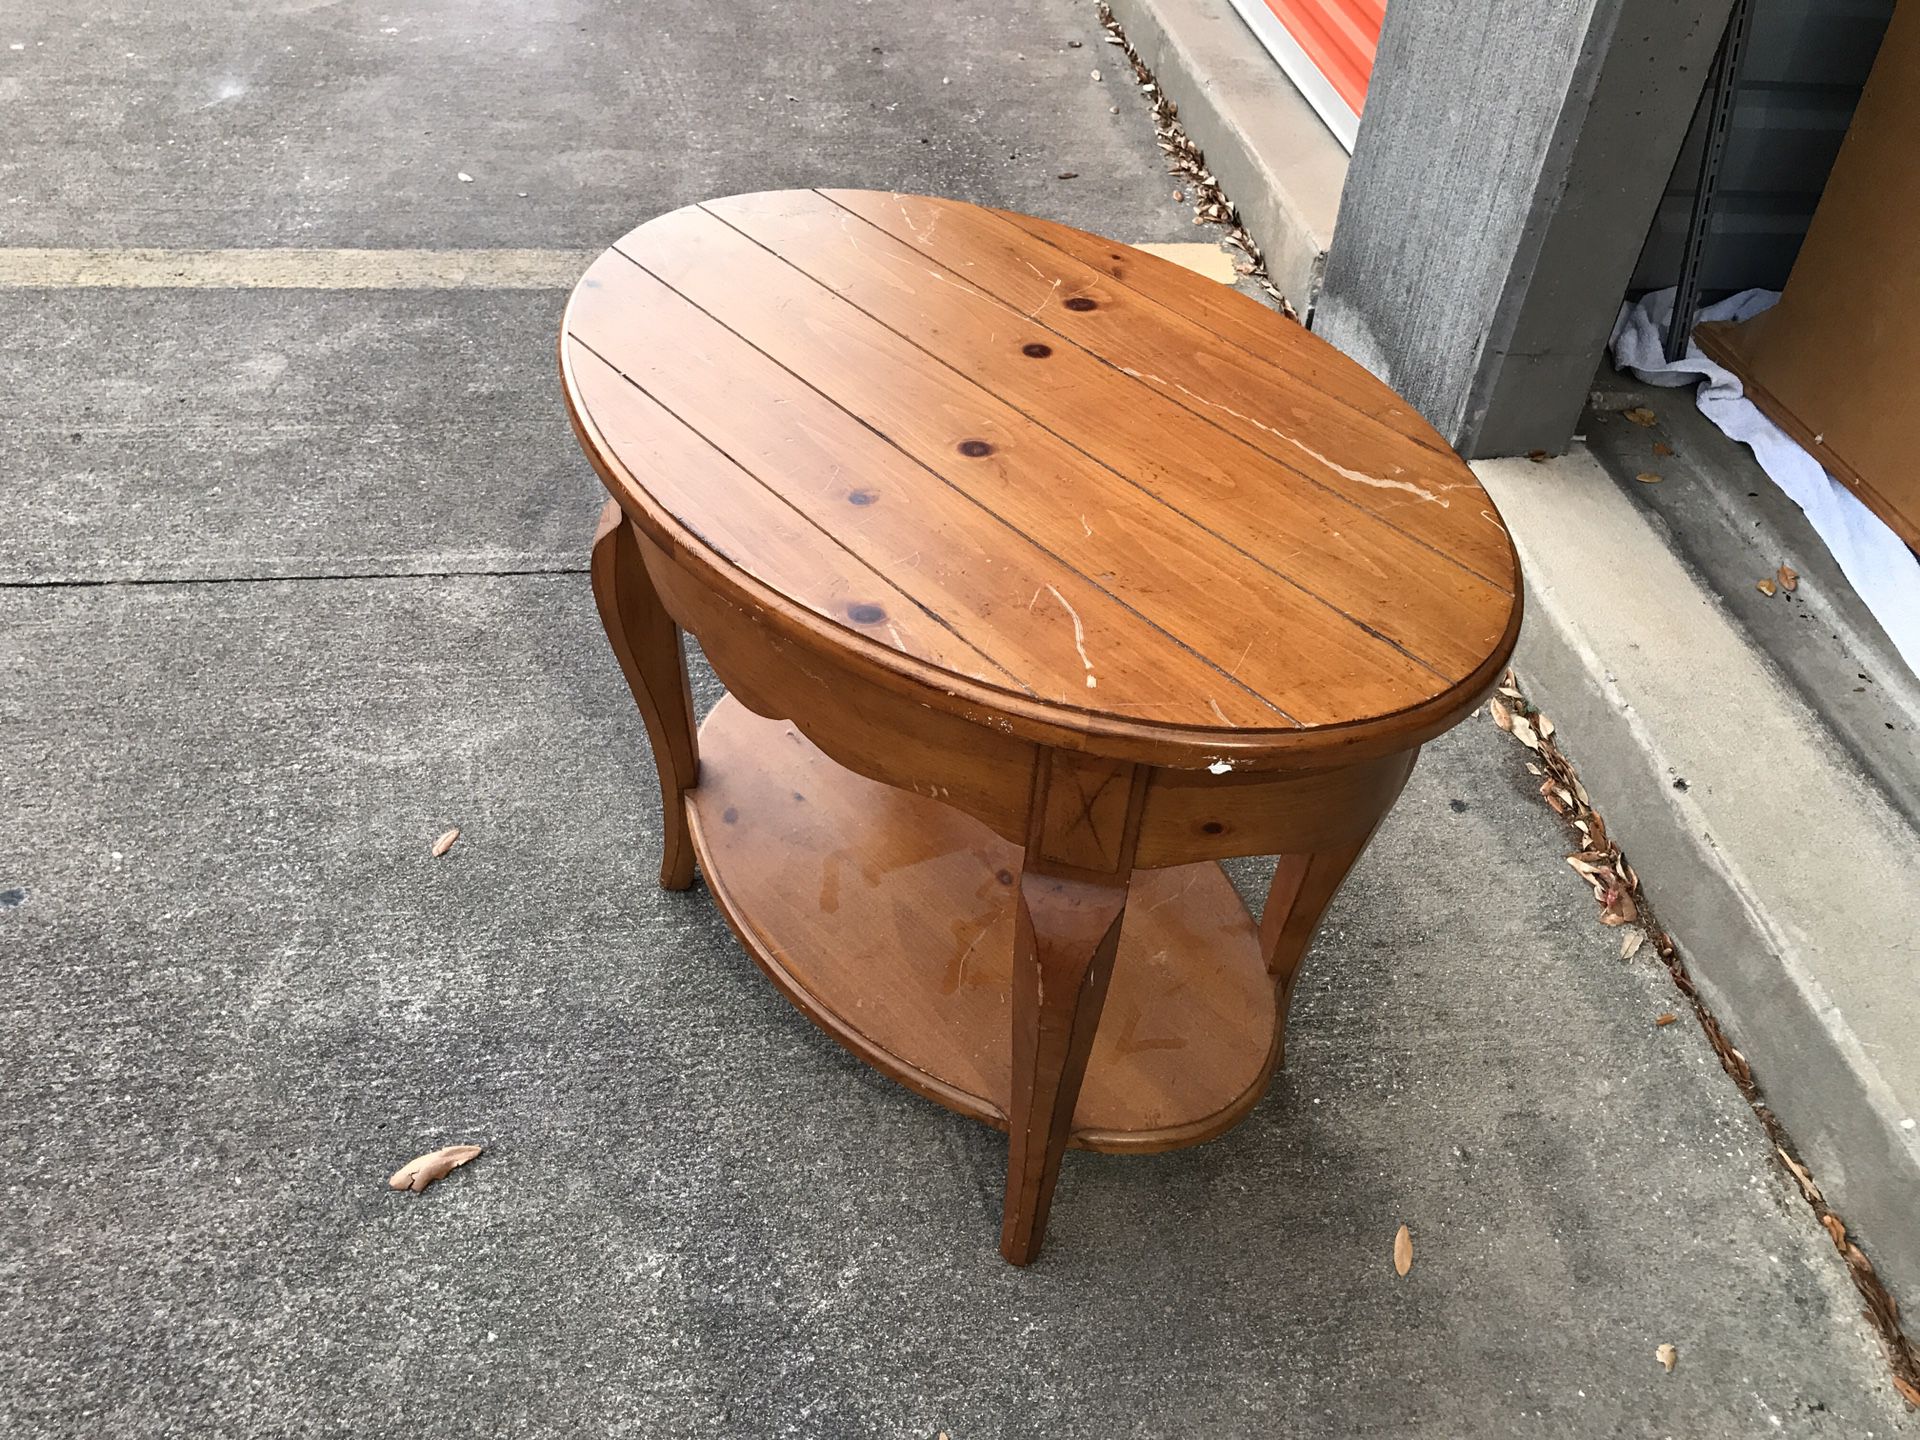 Table has scratches, solid would. Project, great condition